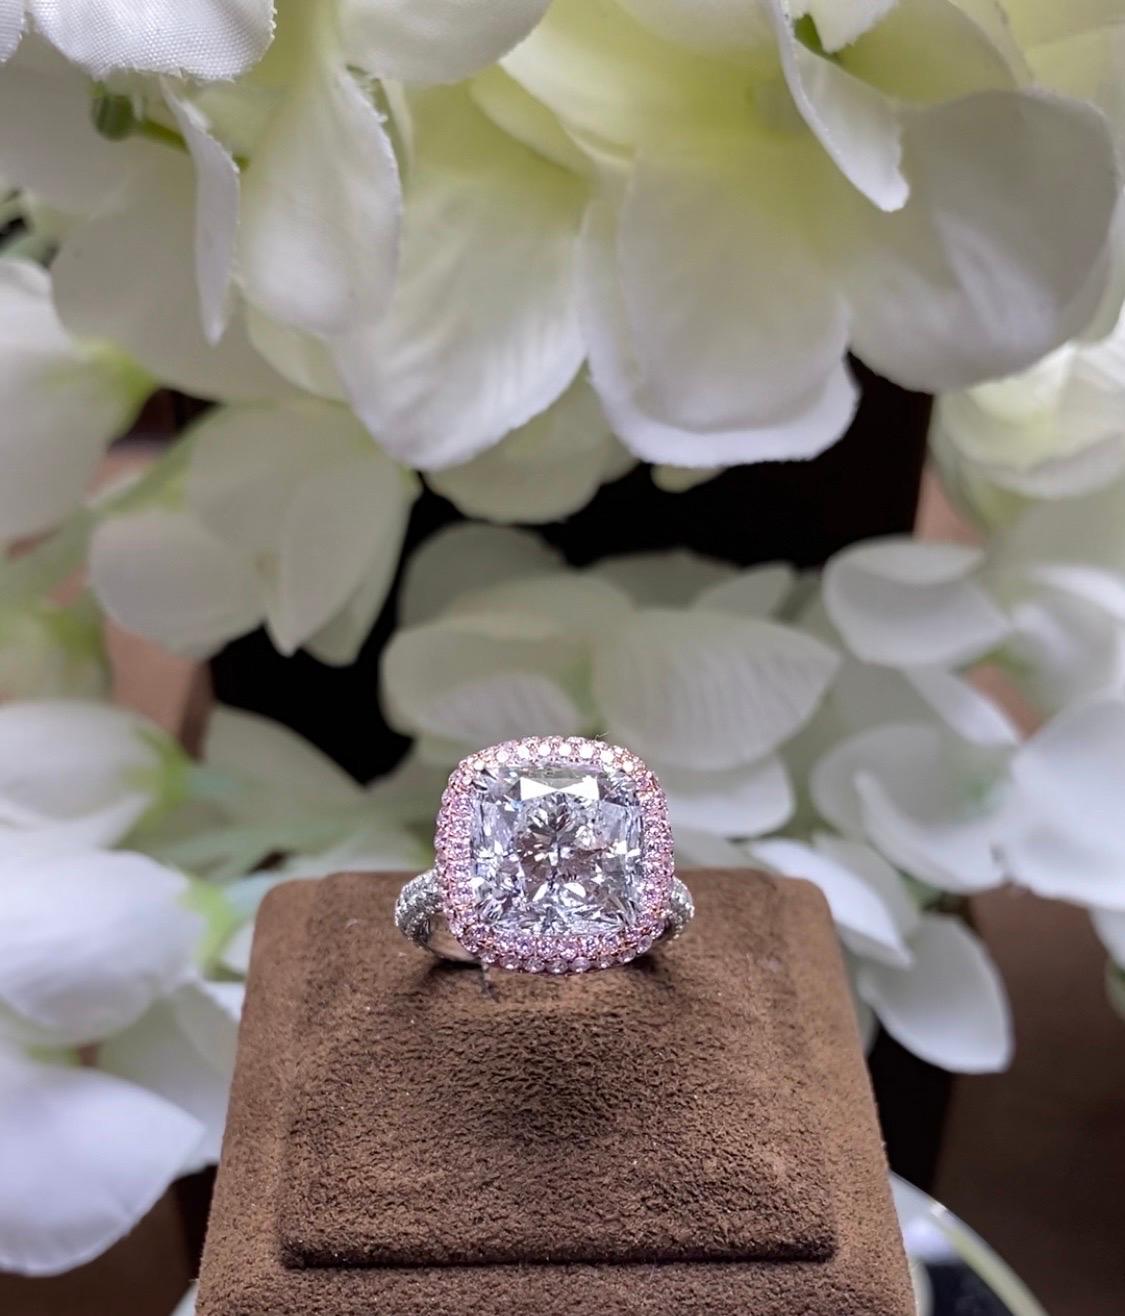 A MORCHA 6.5ct Cushion Diamond,
D color, cut to the highest standards of Brilliance and Light Return. 
Set with 18k White/Rose Gold. 
Pave diamonds - White & Fancy Pink diamonds 
The Diamond ring was designed by our in-house team of designers,